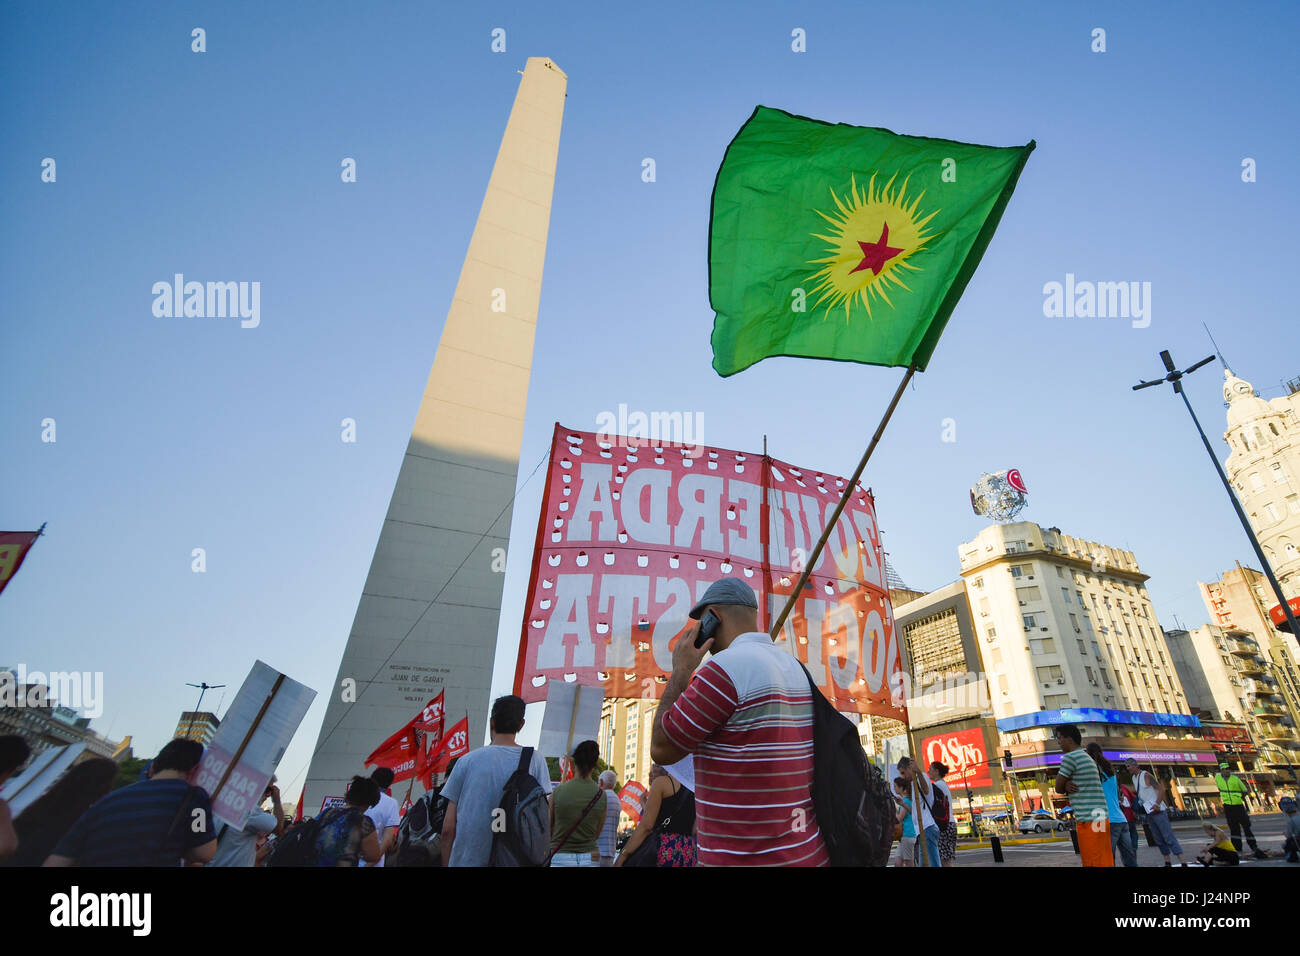 ARGENTINA, Buenos Aires : People gathered to protest on January 22, 2016 against Armed Forces of Turkey's involvement in predominantly Kurdish cities. The protesters are alleging that the government is using the guise 'fighting terrorism' but rather are committing genocide in southeastern Turkey. Stock Photo